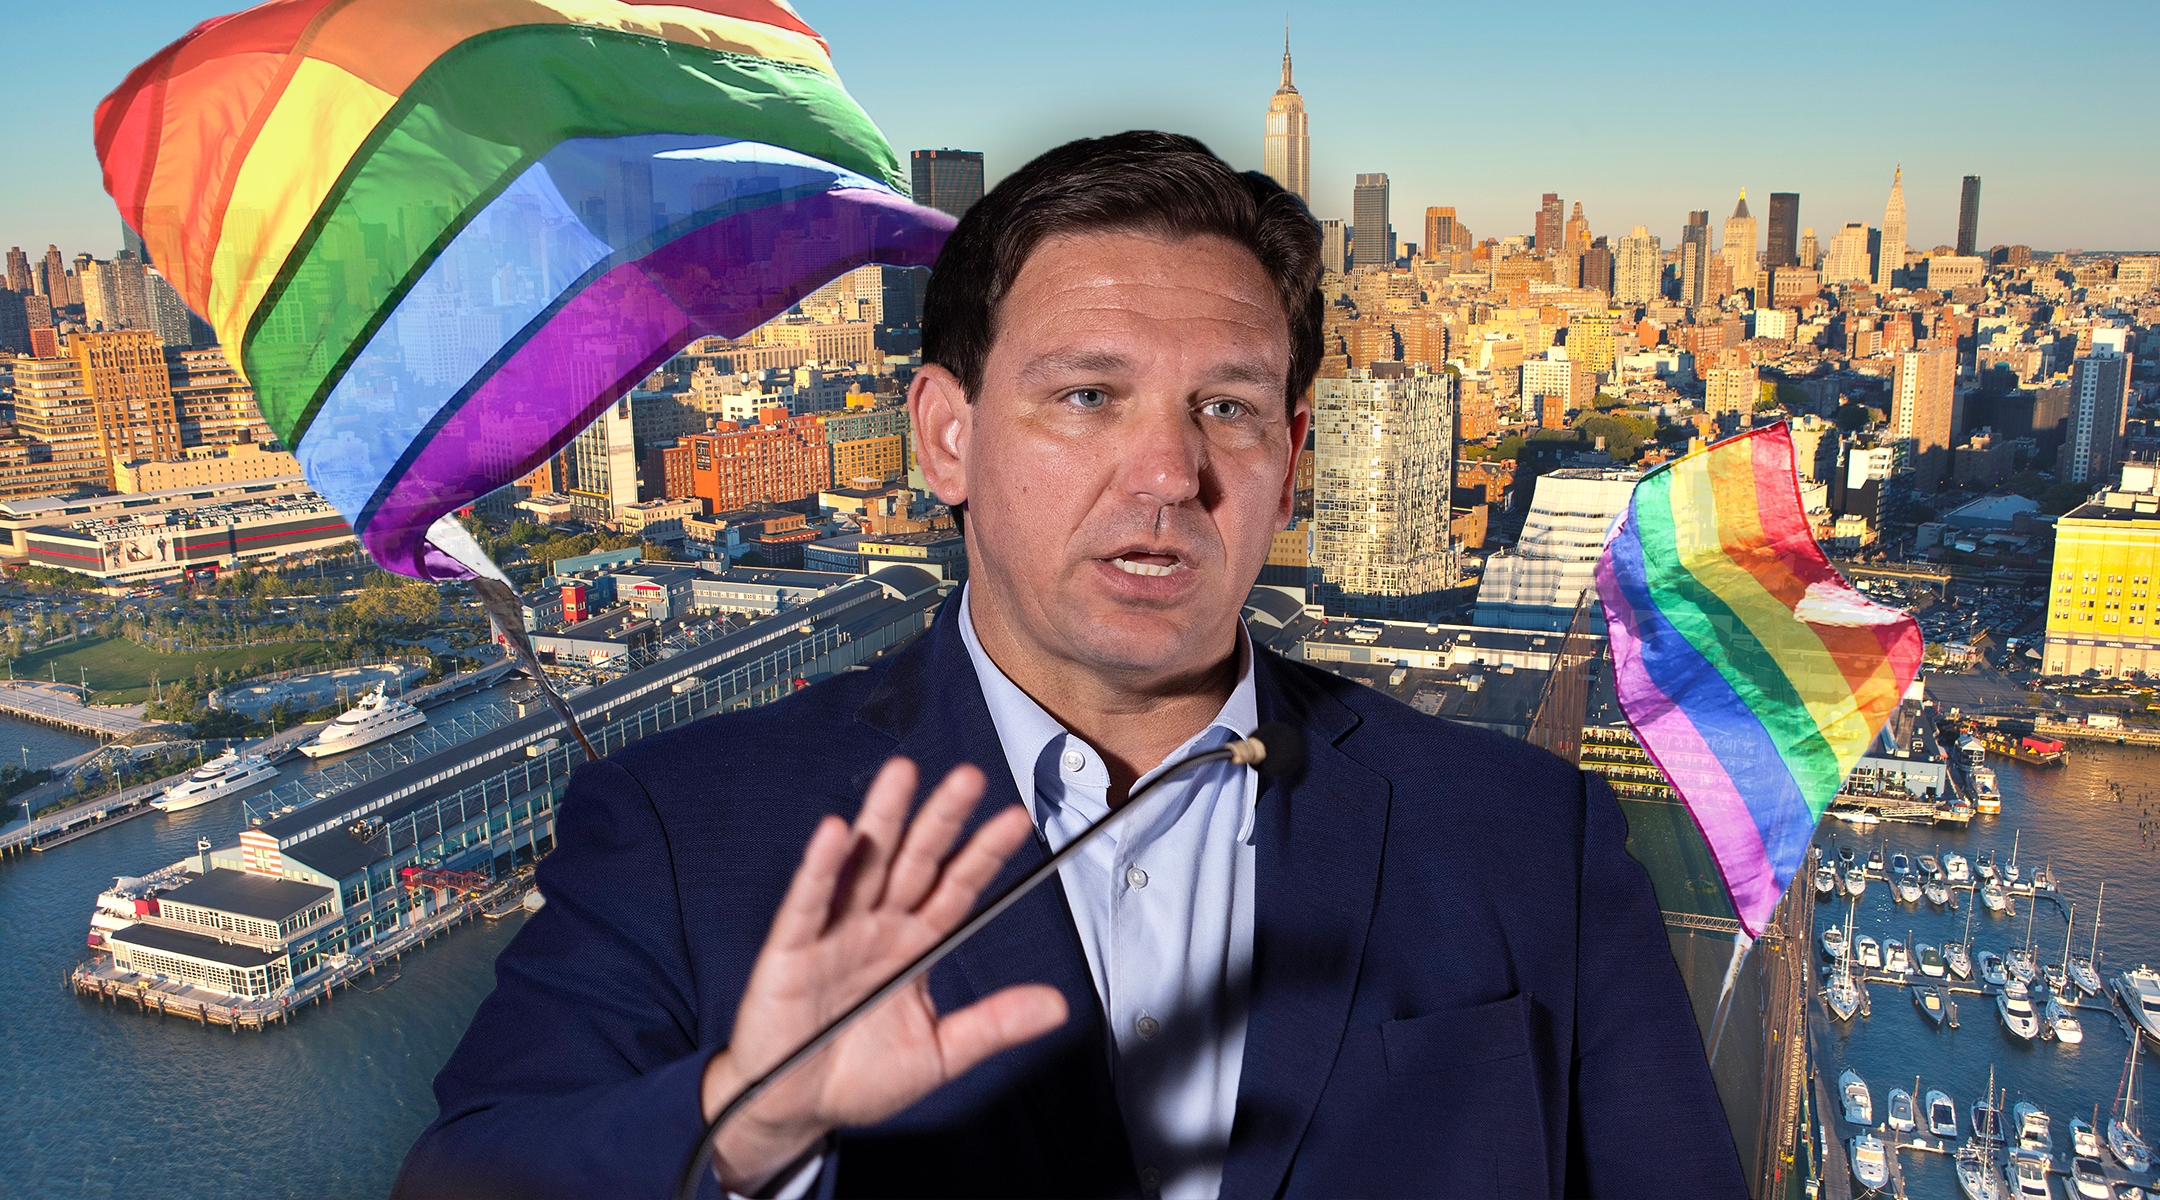 Florida Governor Ron Desantis will be speaking at the Jewish Leadership Conference at Chelsea Piers this Sunday in New York City. (Getty/Paul Mansfield/Danny Lehman/Joe Raedle)